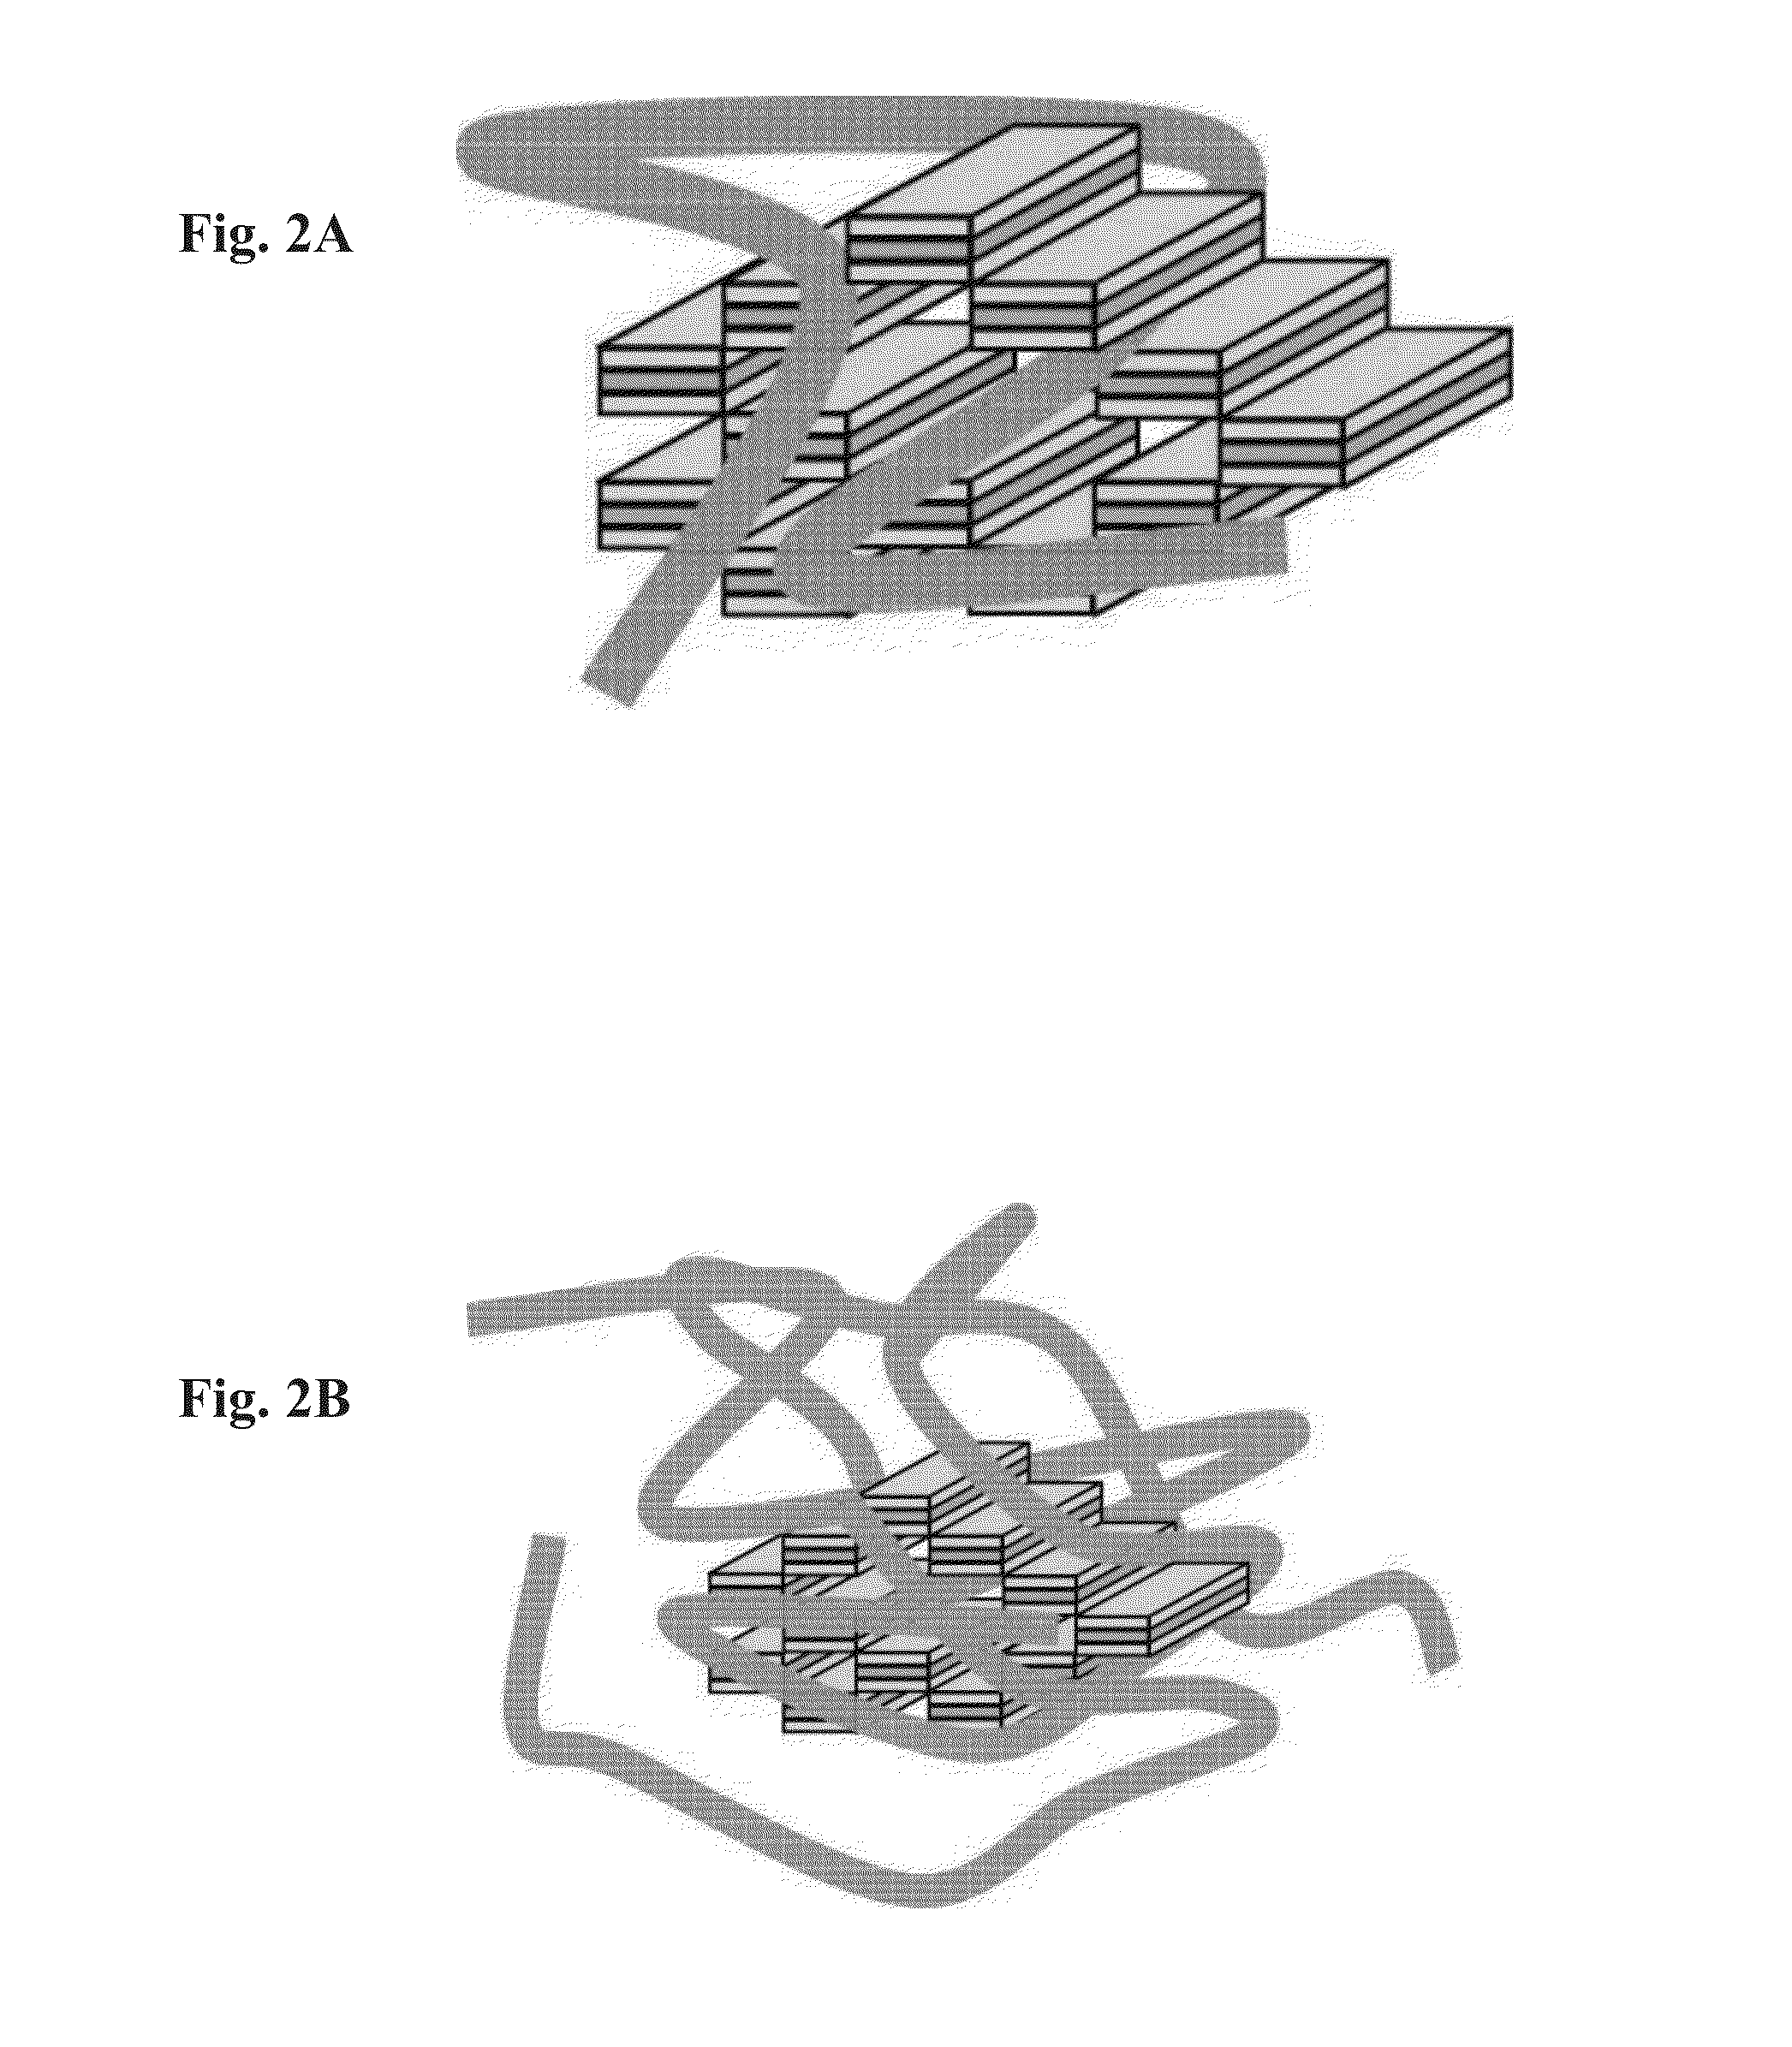 Method for pretreatment of wastewater and recreational water with nanocomposites